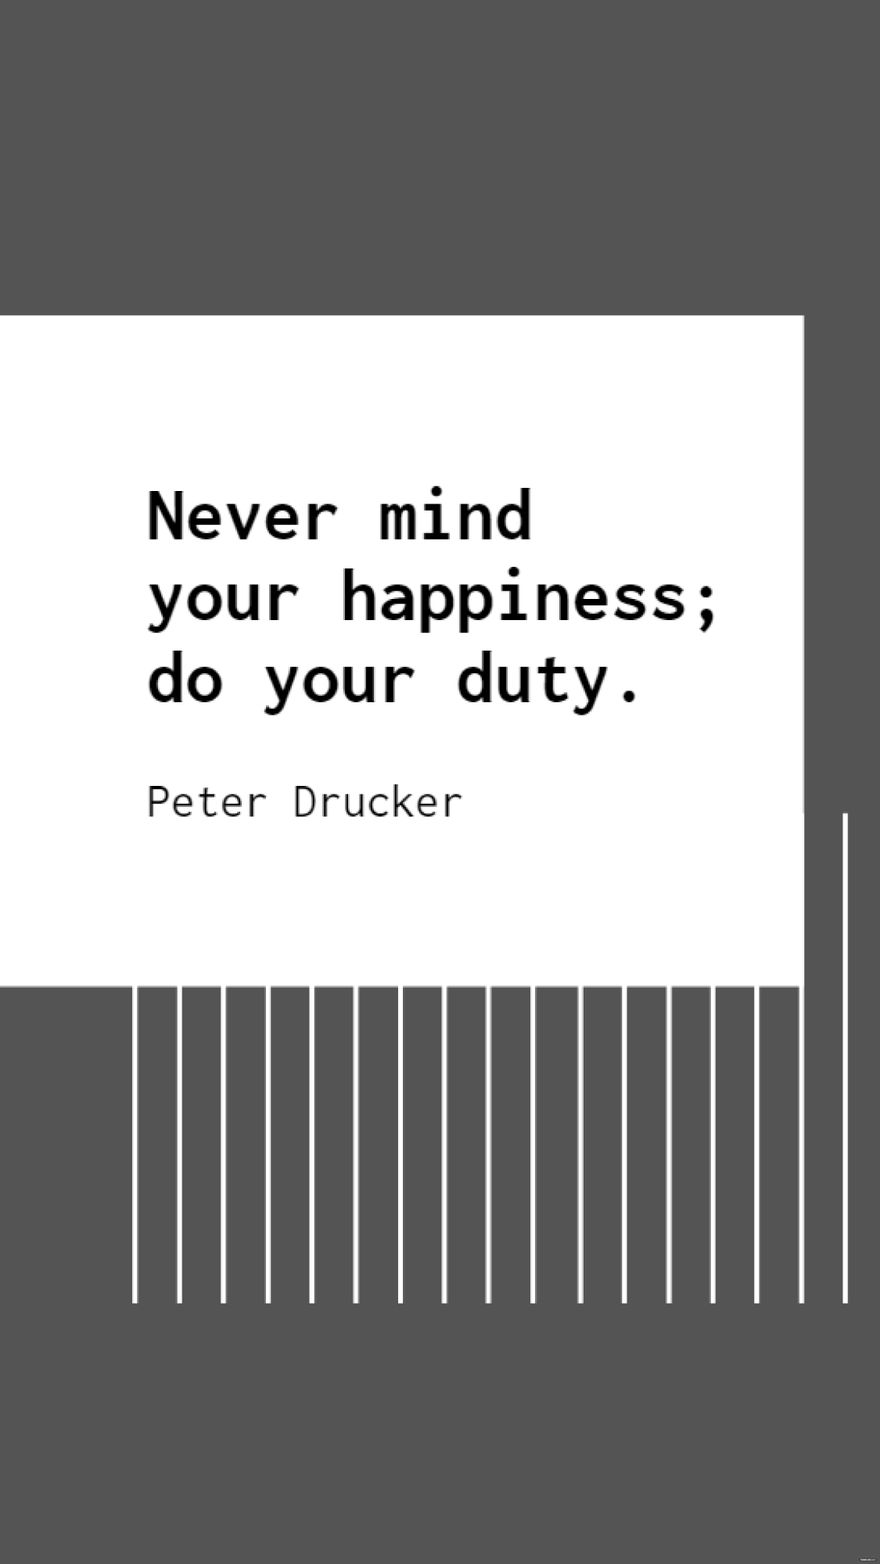 Free Peter Drucker - Never mind your happiness; do your duty. in JPG